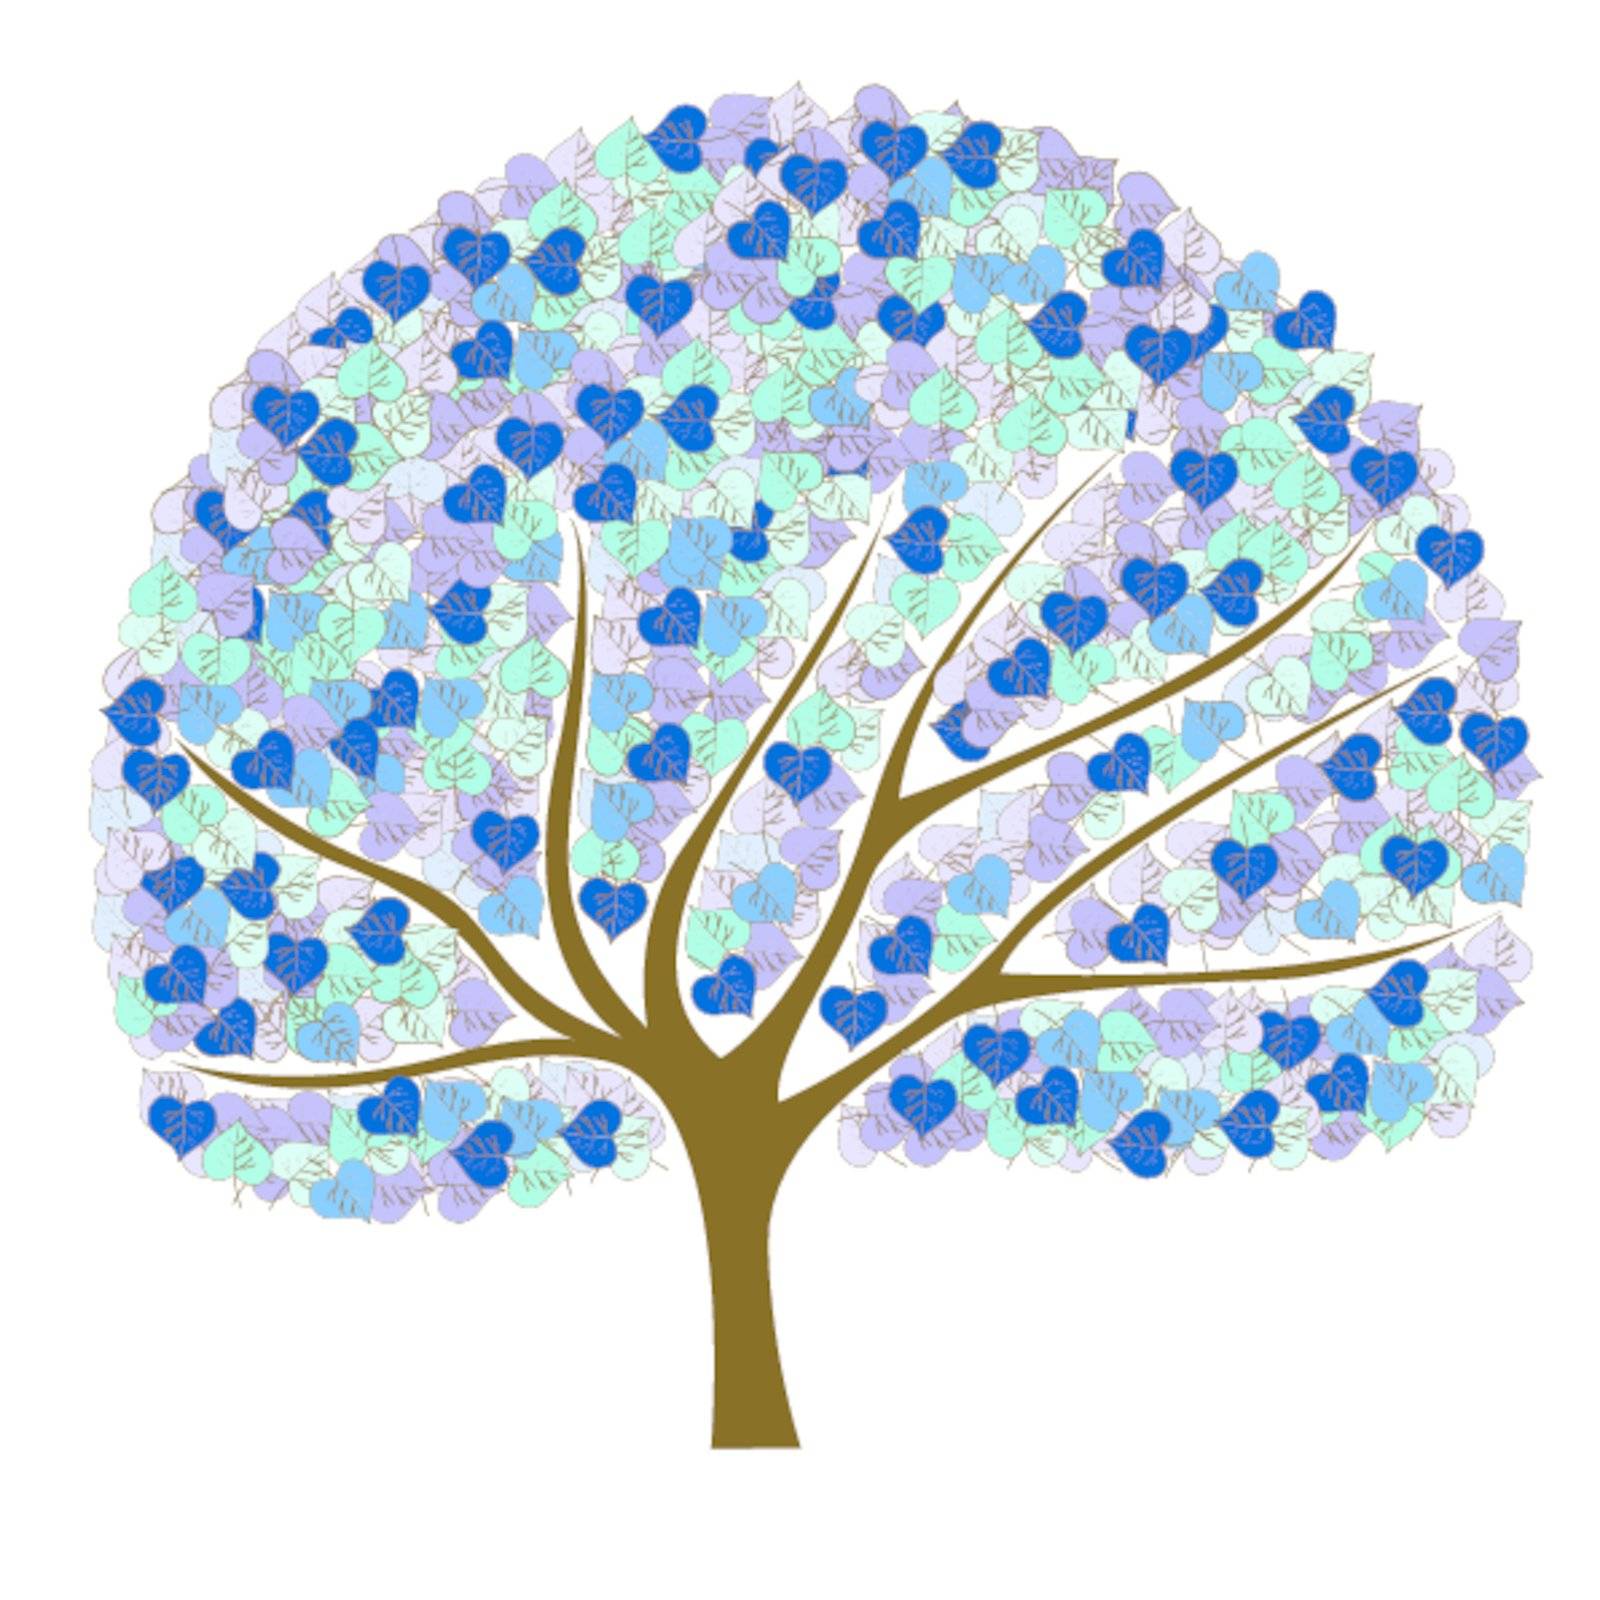 Colorful tree vector background by krabata